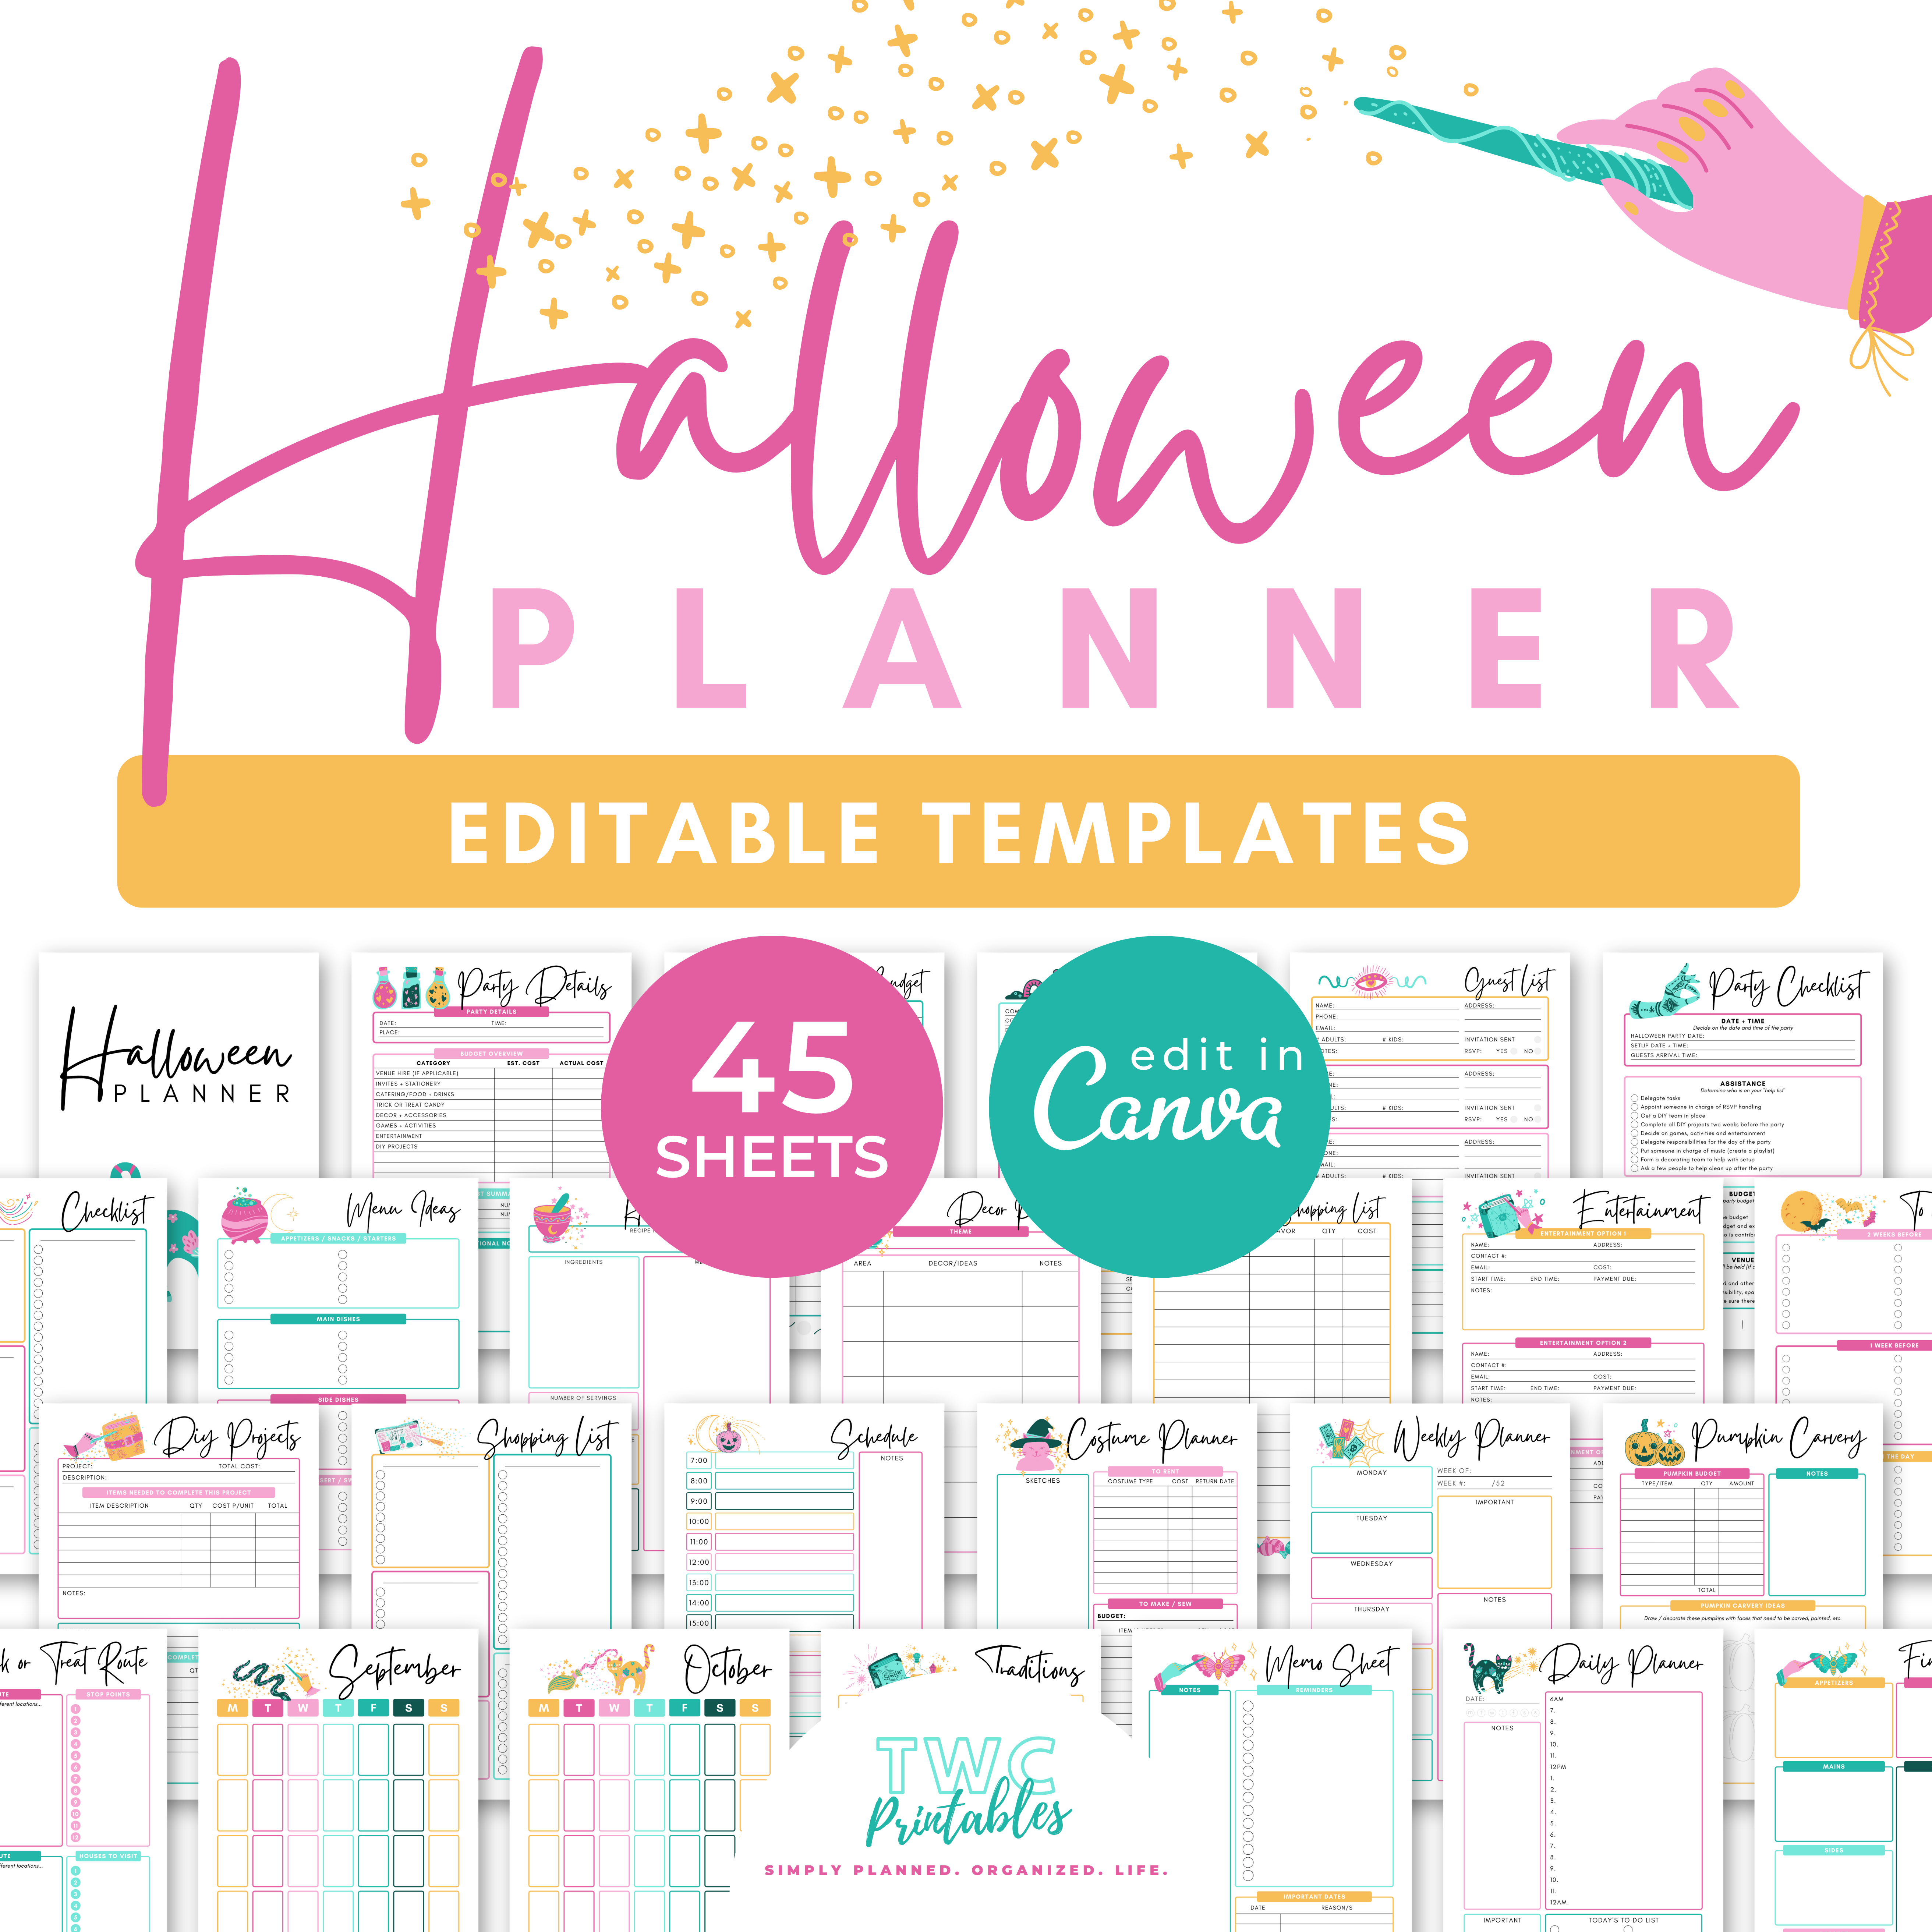 The ultimate Halloween party planner will help you to plan all aspects of this epic event - from Halloween costume planning and pumpkin carving ideas, to menu planning, guest list management, and more! Simply edit this template with the free version of Canva - you can change the entire design, including fonts, colors, elements, and much more! A free Canva guide for beginners is included in your purchase of this listing.